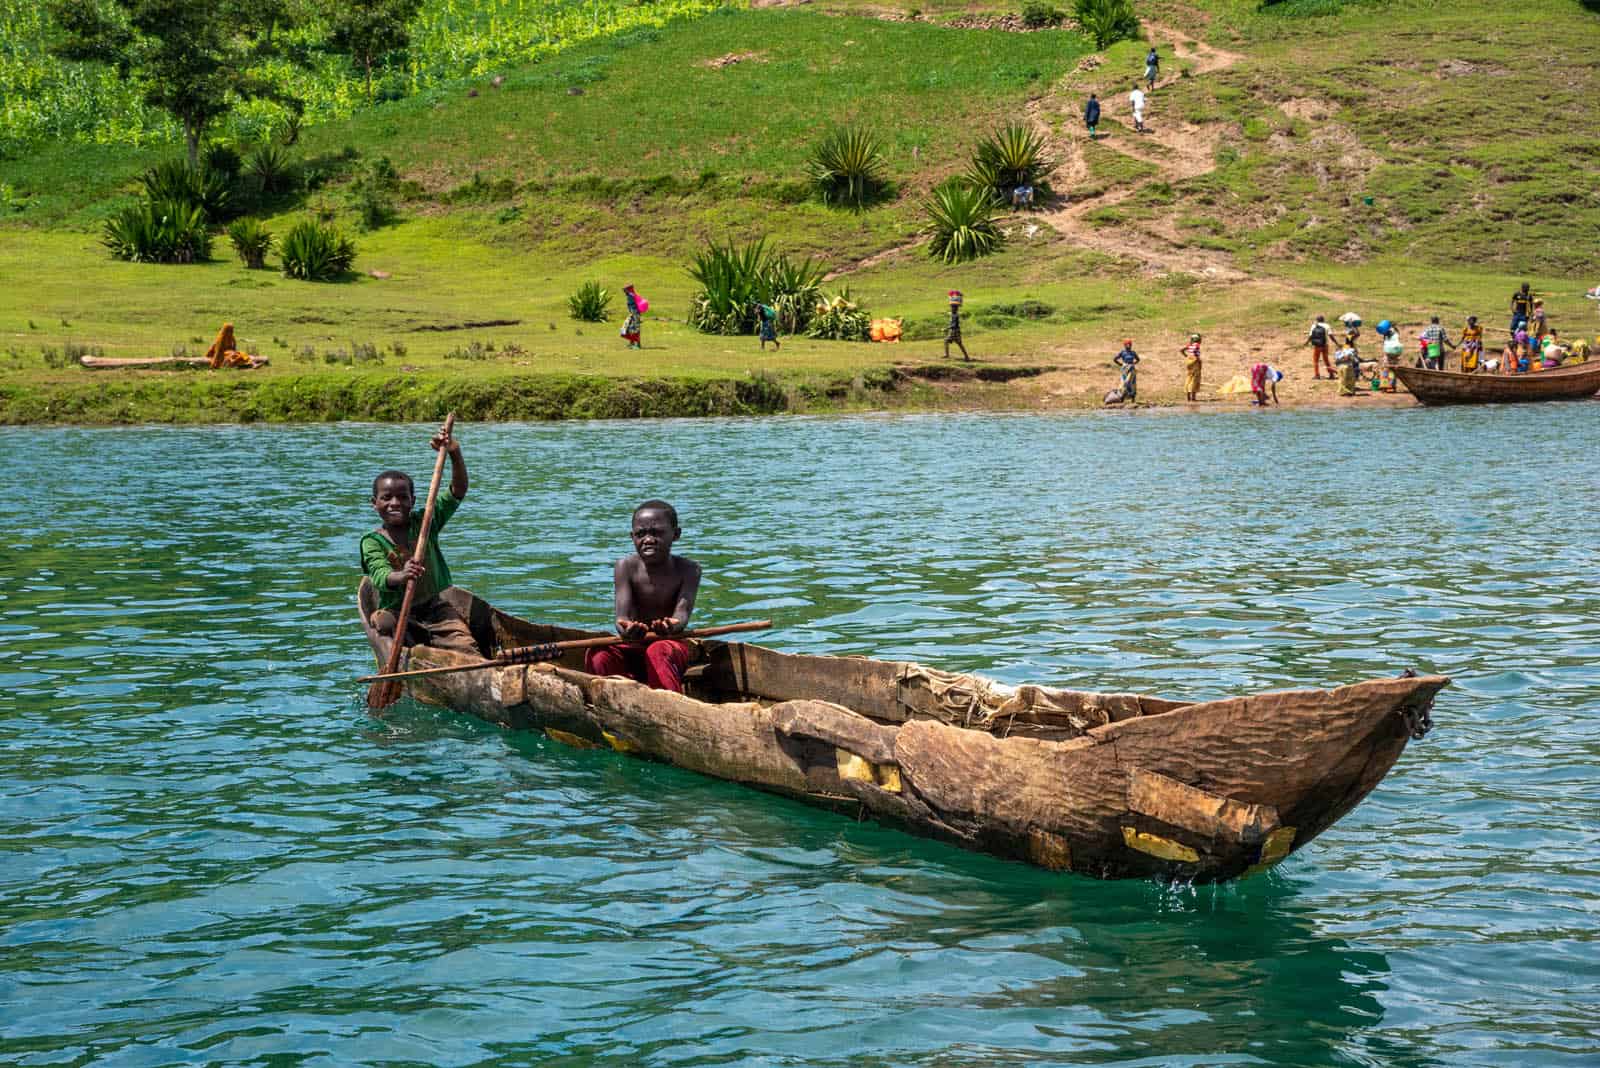 Two children are in a wood canoe on a lake. There are more people unloading items from another boat in the background.